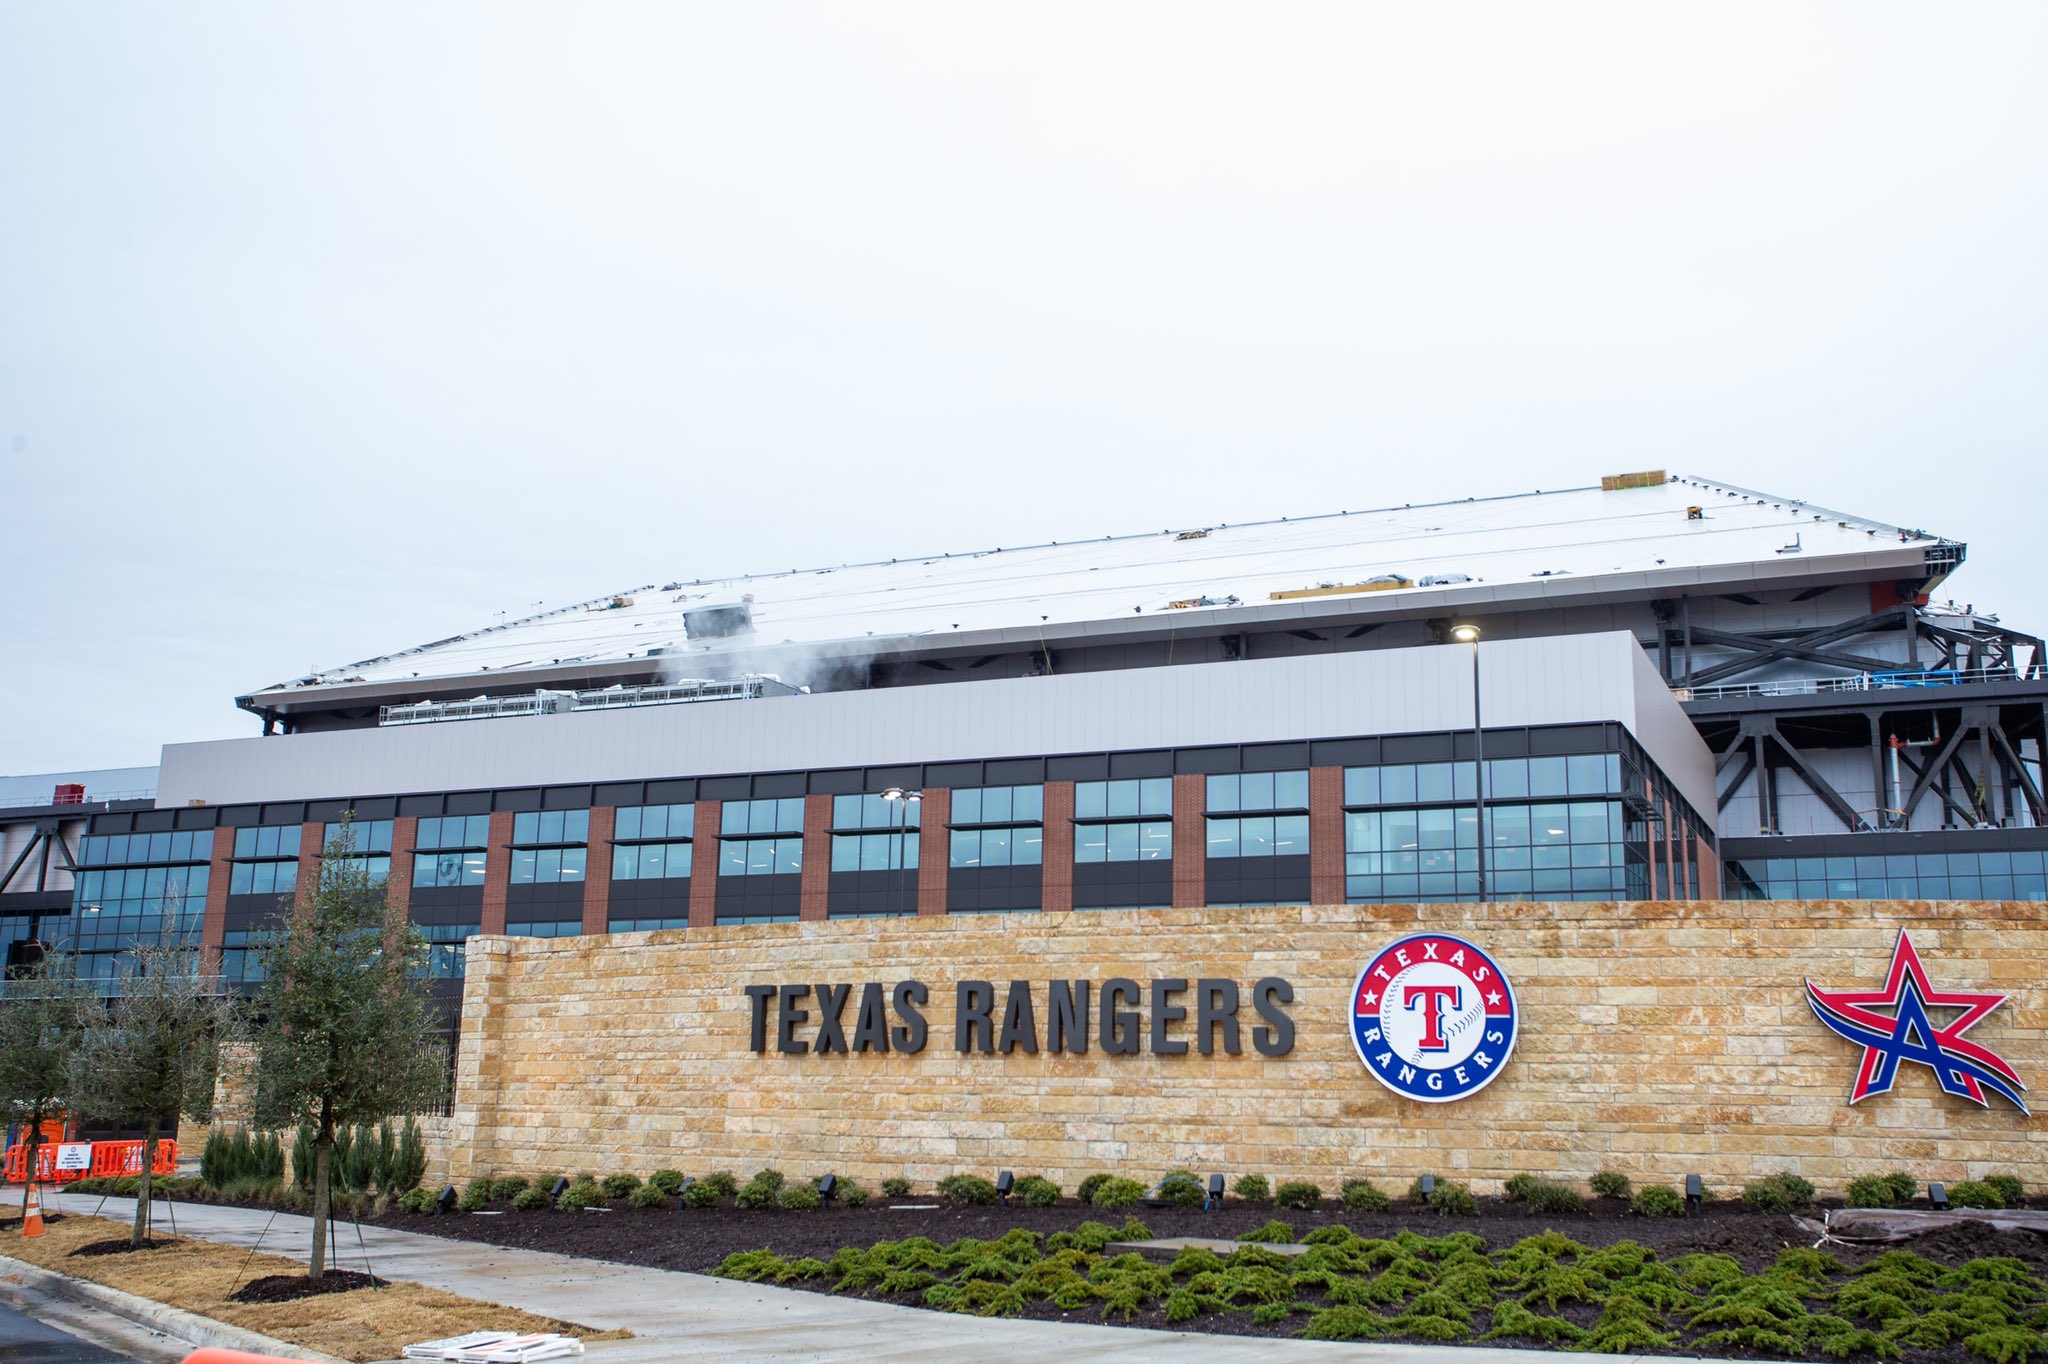 Globe Life Field on X: Home Sweet Home. The @Rangers front office